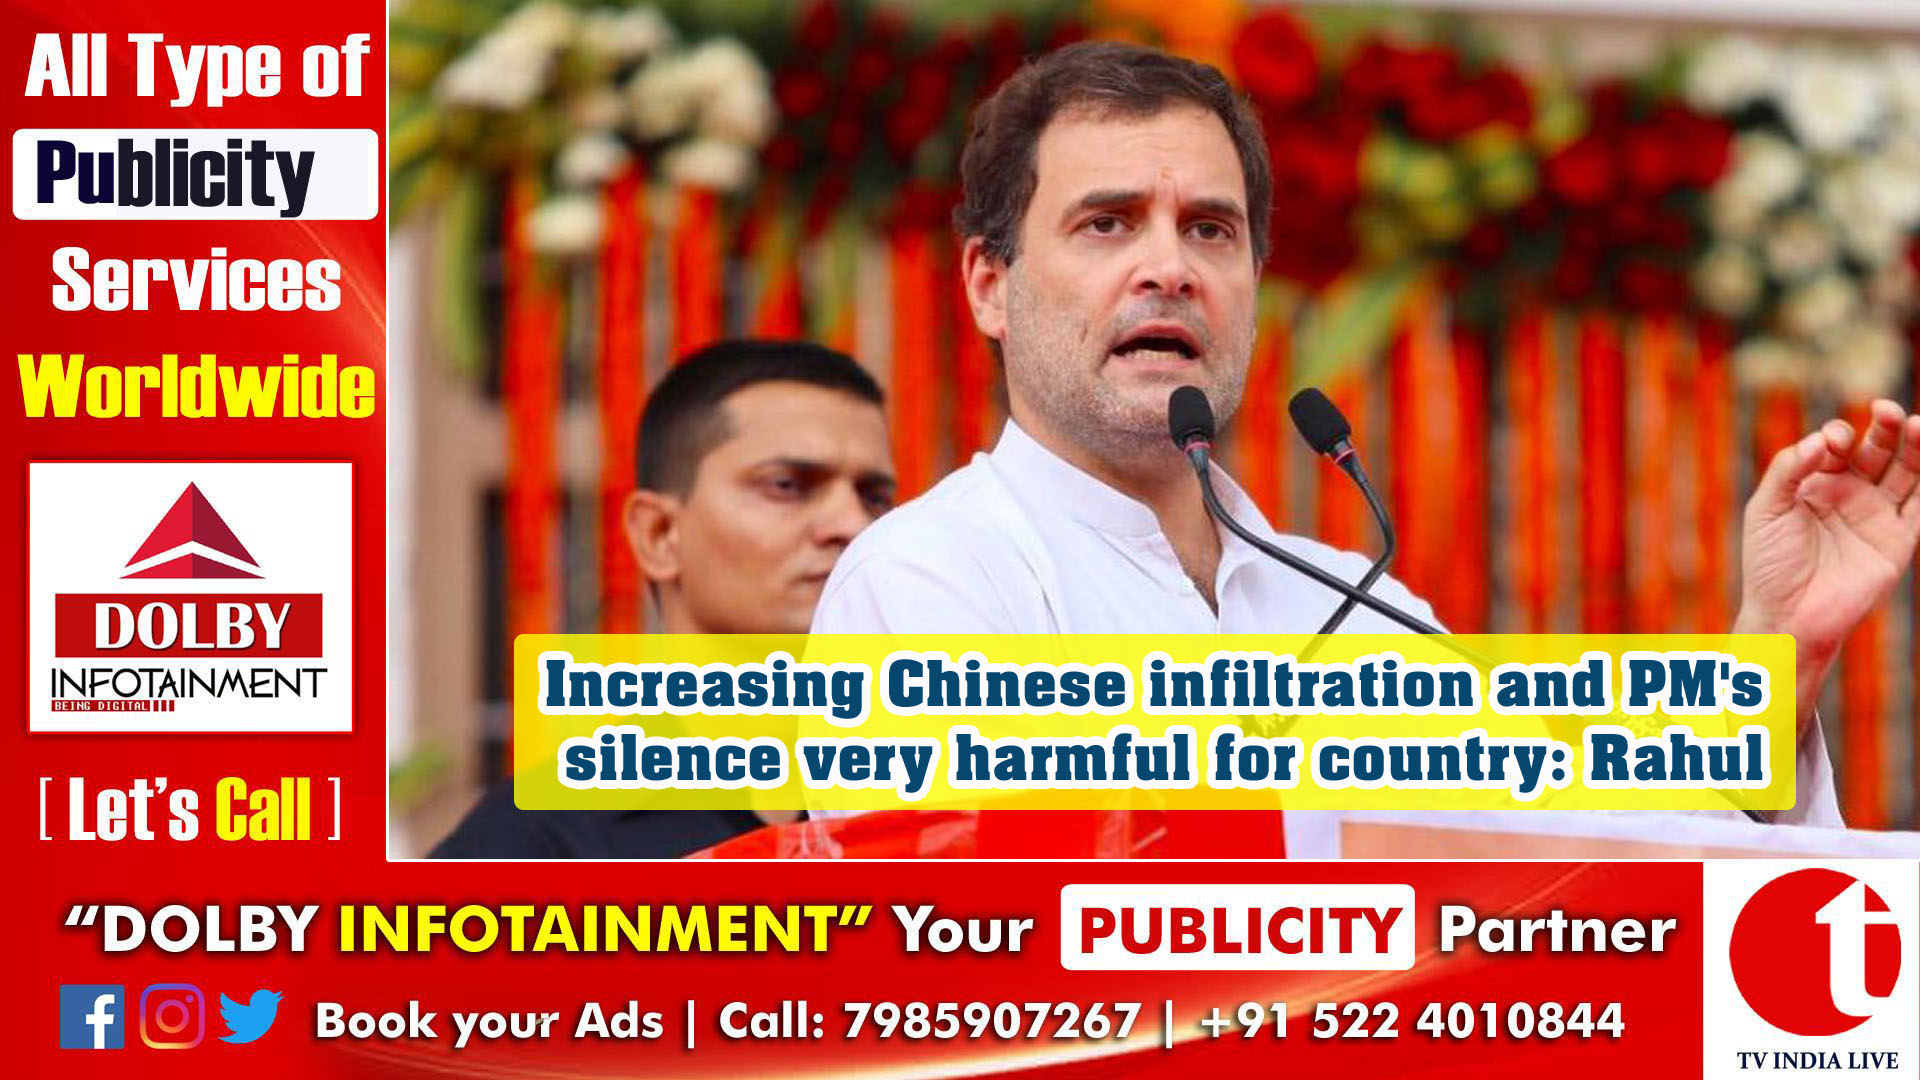 Increasing Chinese infiltration and PM's silence very harmful for country: Rahul